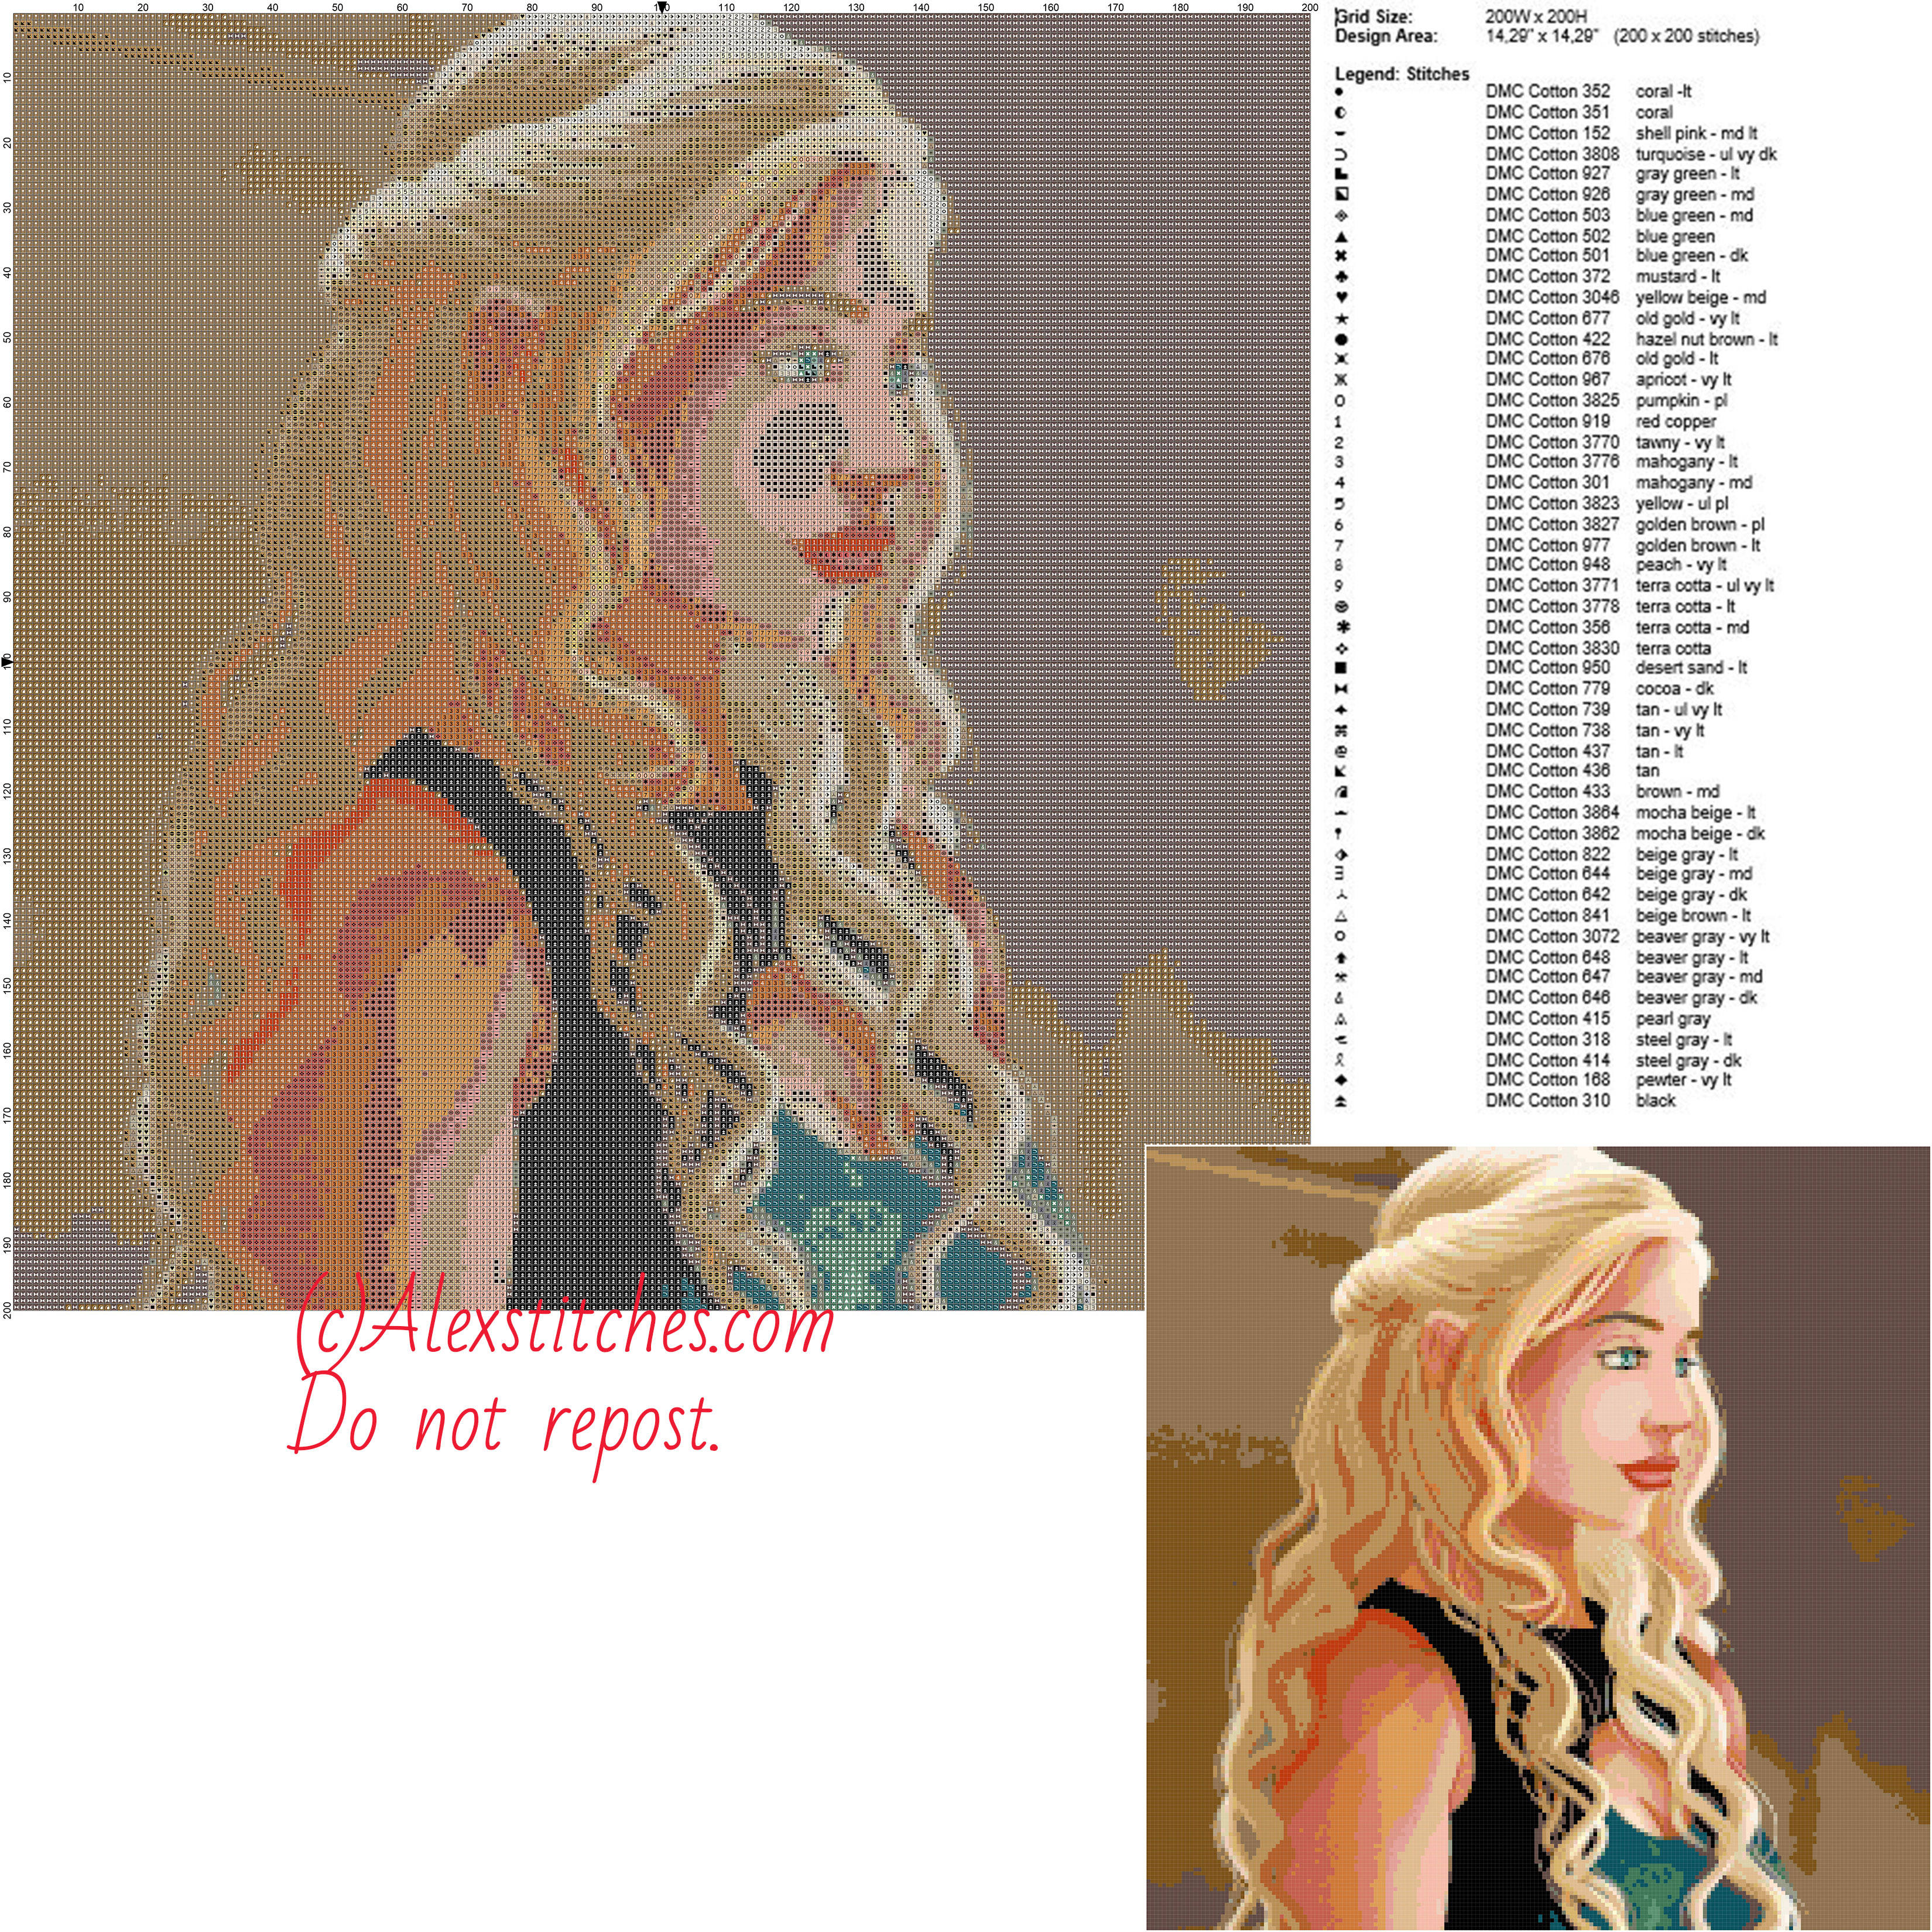 Daenerys (Game of Thrones) free cross stitch pattern 200x200 50 colors